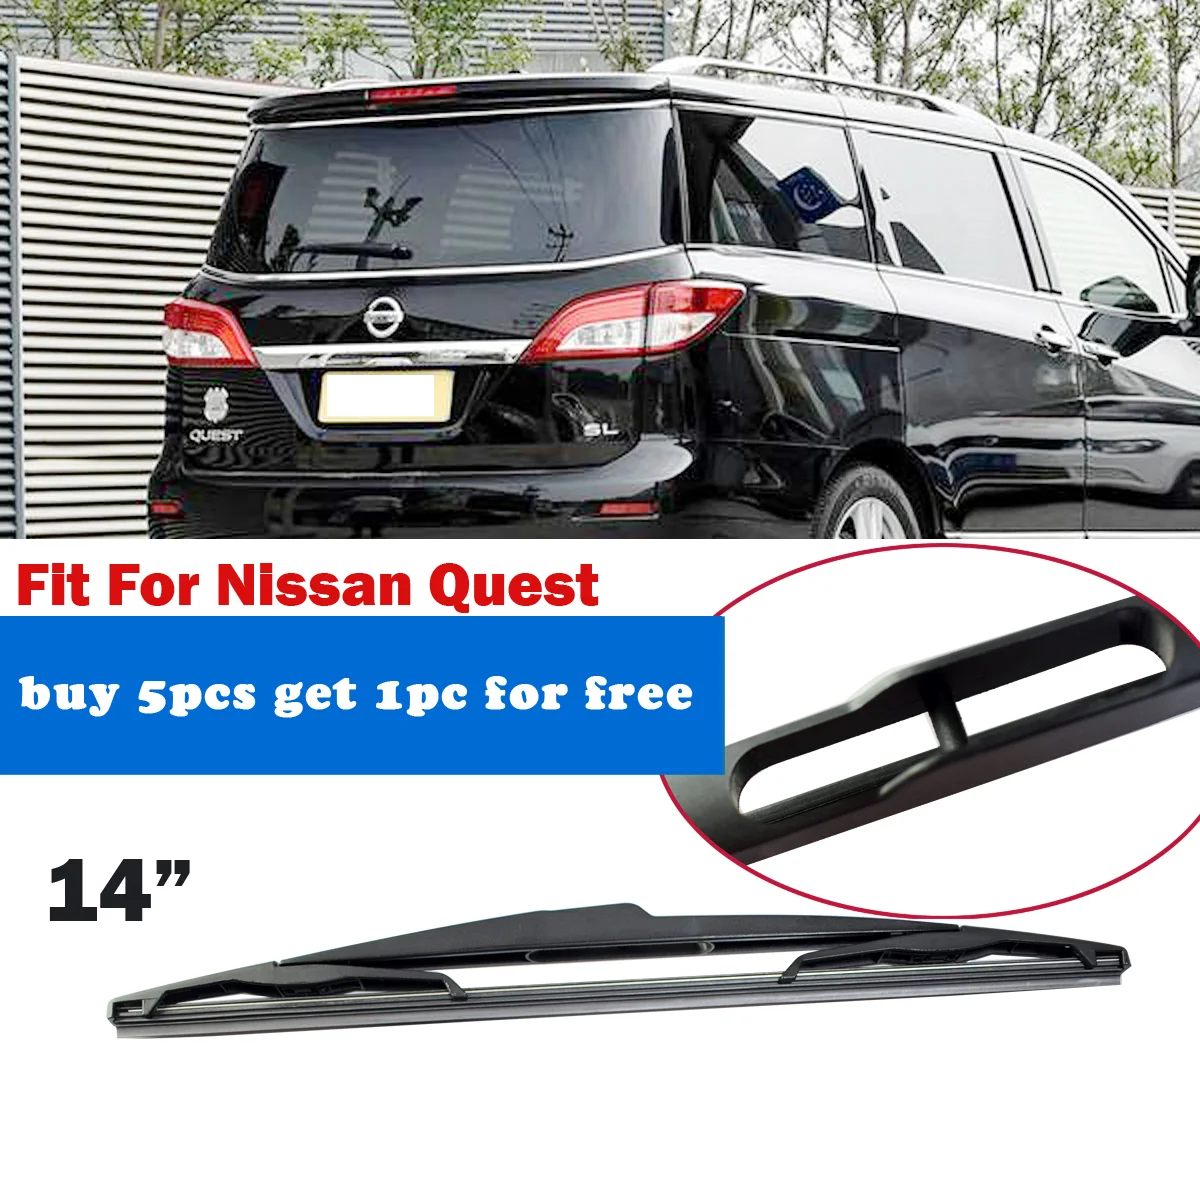 

1PC Car Rear Wiper Blade 14" Windscreen Windshield Auto Wipers Accessories for Nissan Quest YC102012-quest